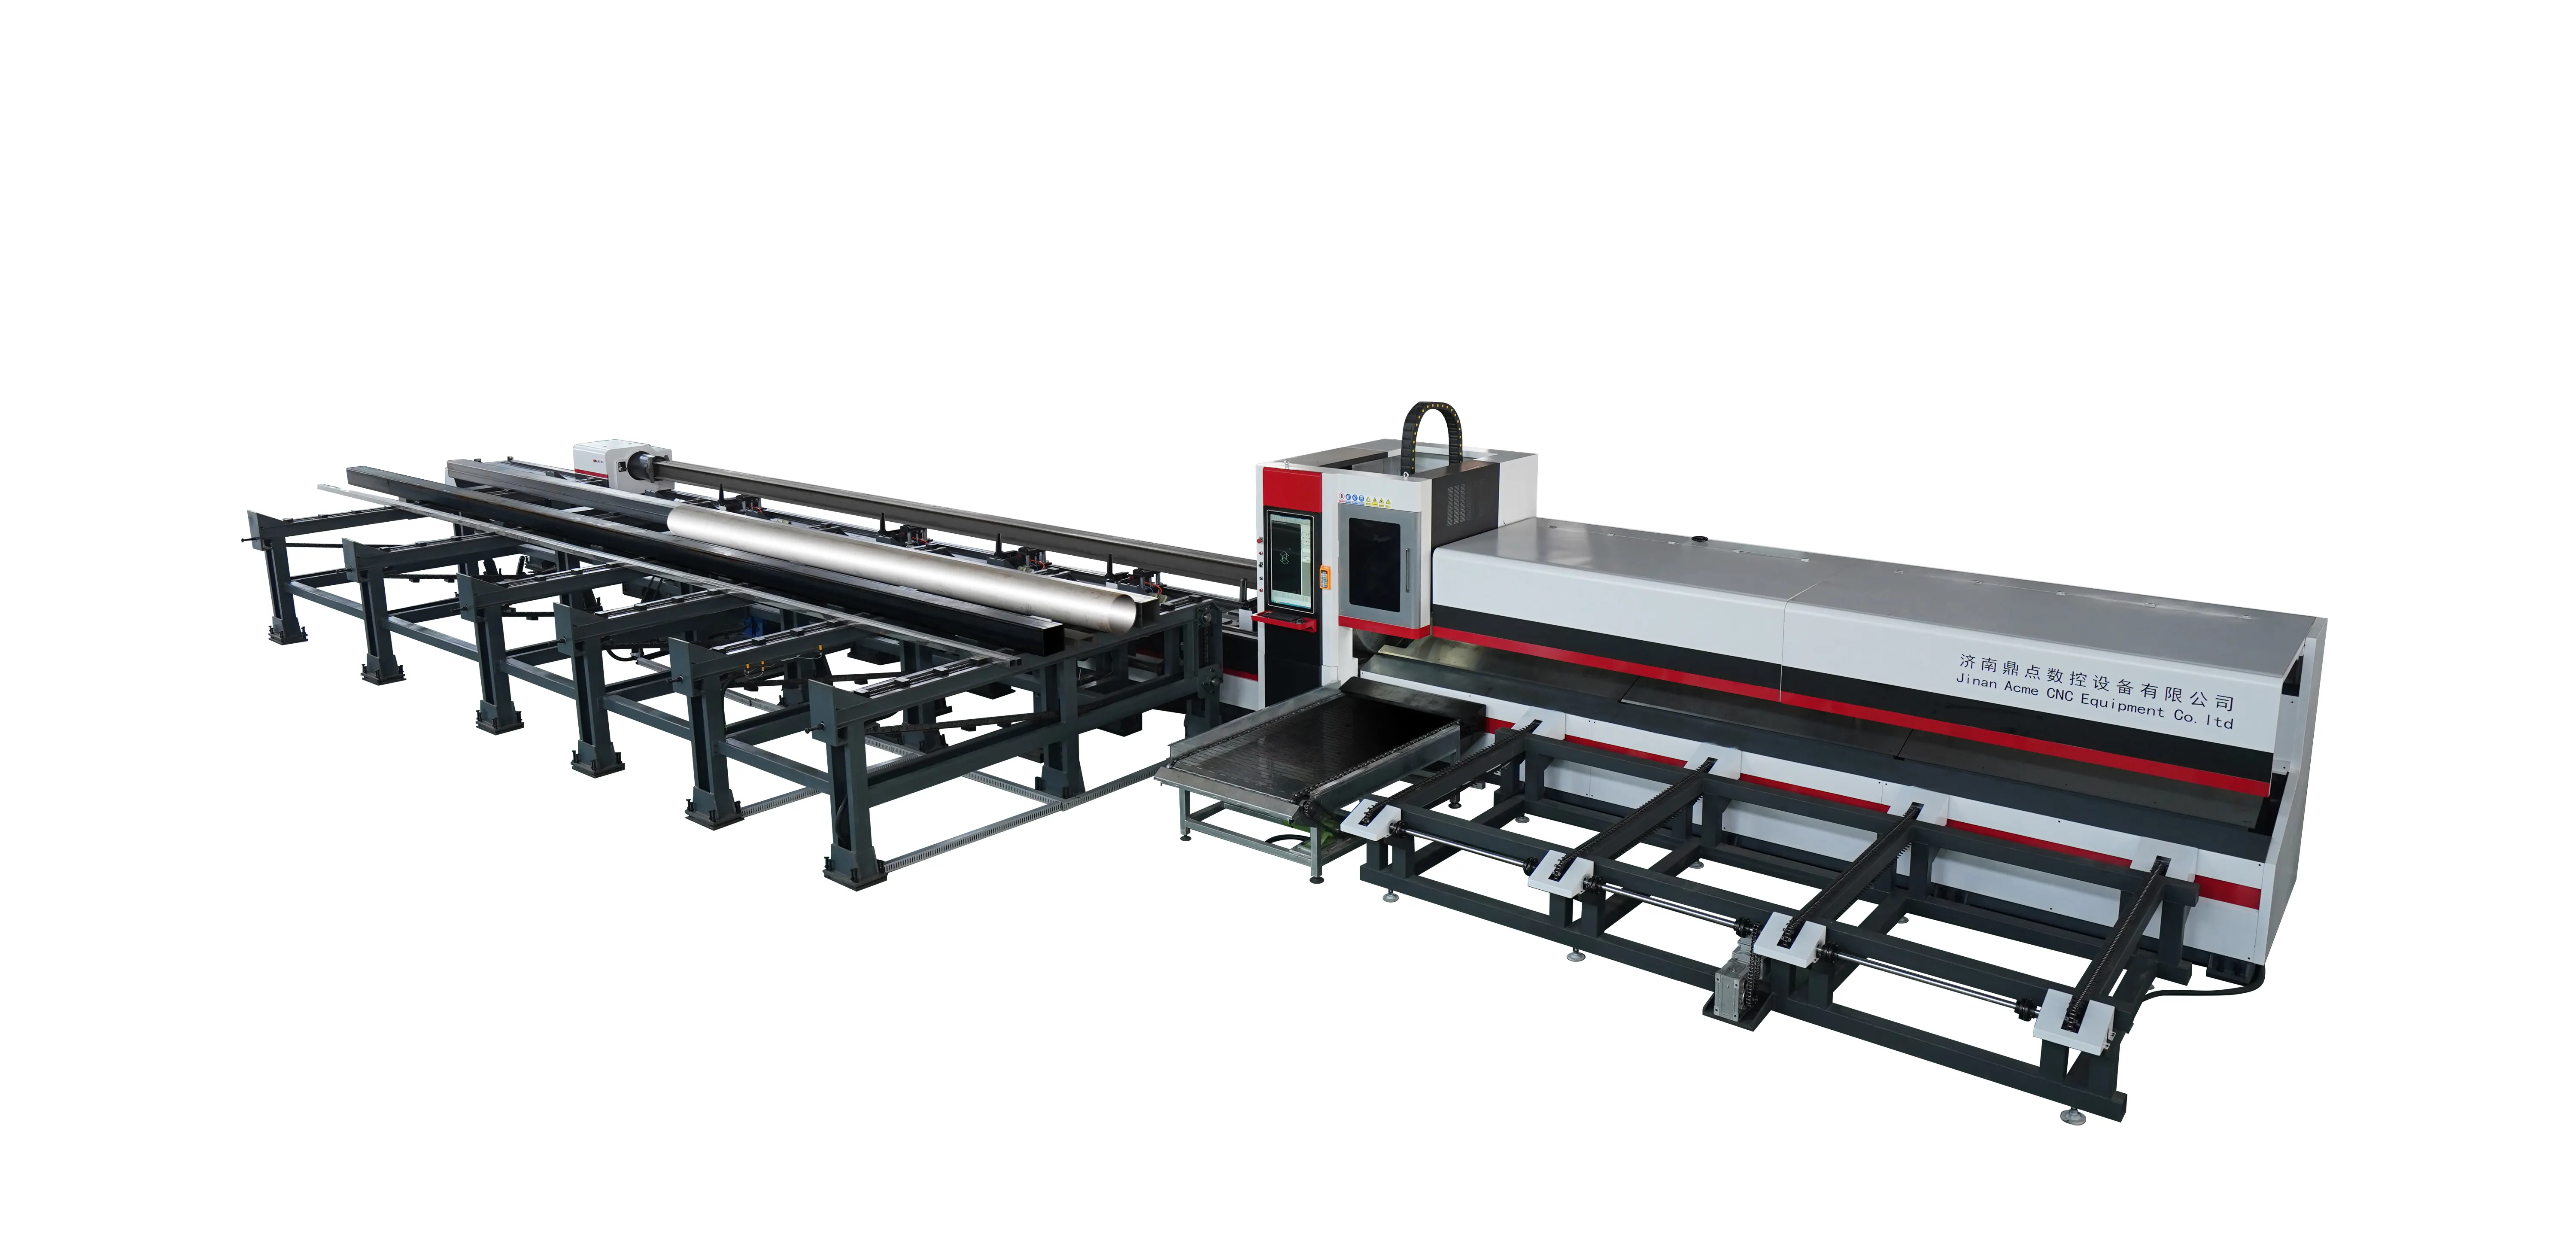 Acme LT-12035EA laser tube cutting machine was successfully delivered to Daqing Oilfield